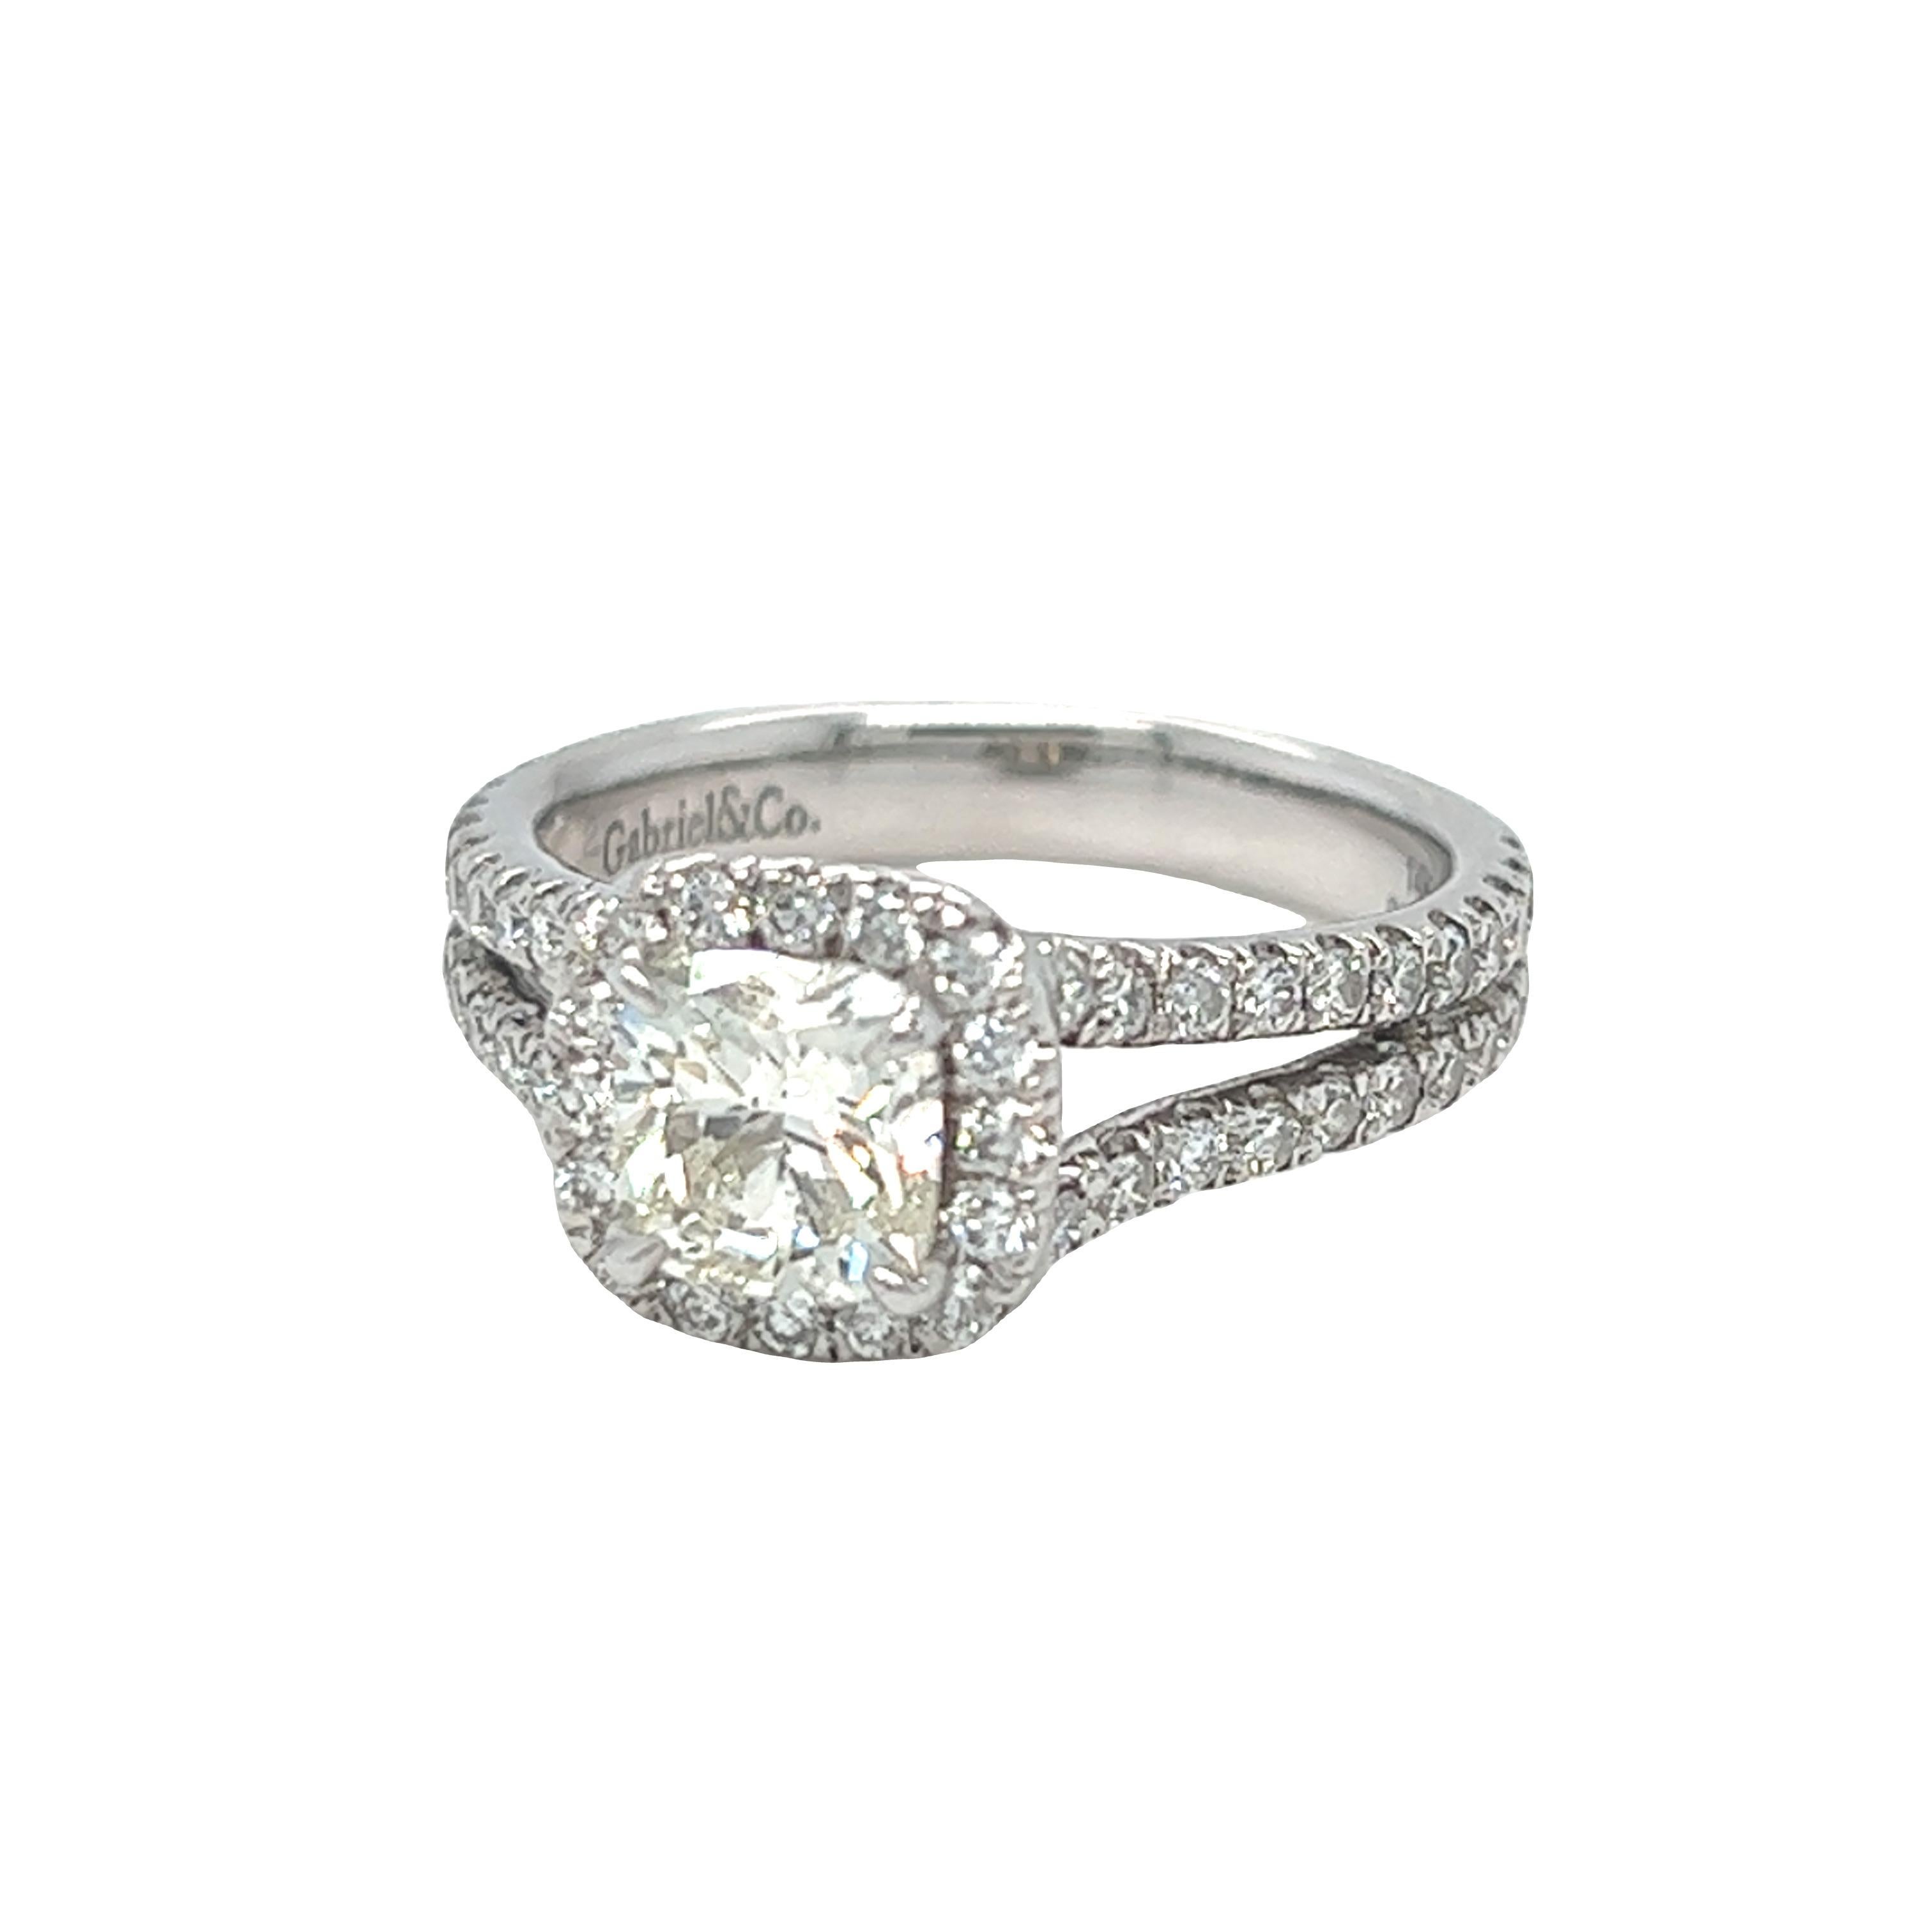 Modern classic cushion halo diamond engagement ring centers a beautiful cushion cut diamond, J color and SI1 clarity, weighing approximately 1.15 carat. The split shank setting and diamond peekaboo on either side adds a modern touch to the classic